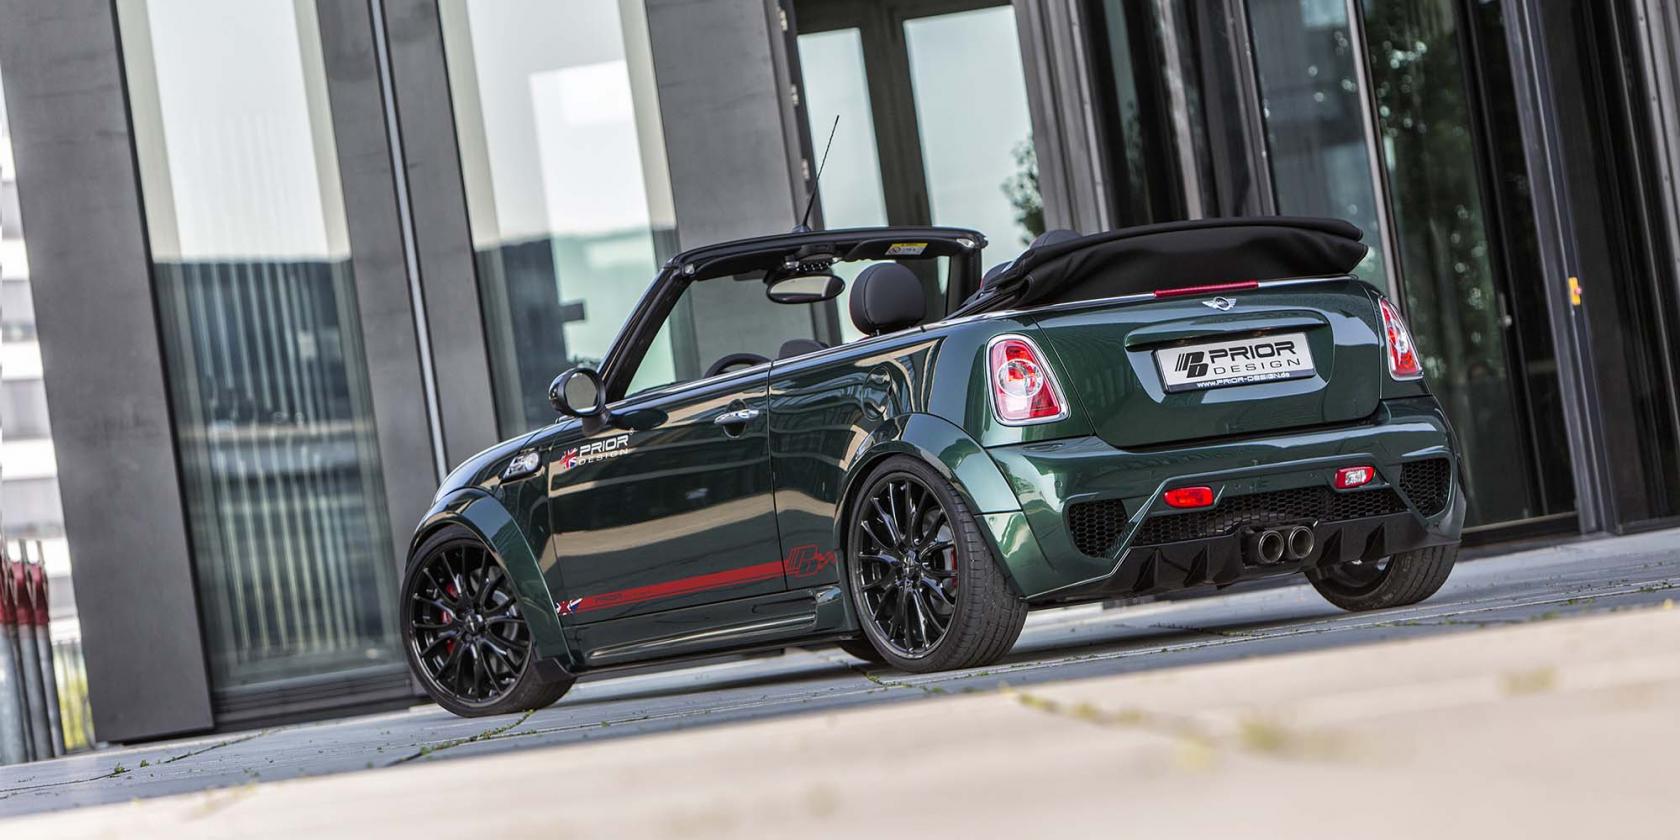 Check our price and buy Prior Design PD300+ body kit for Mini Cooper S R56